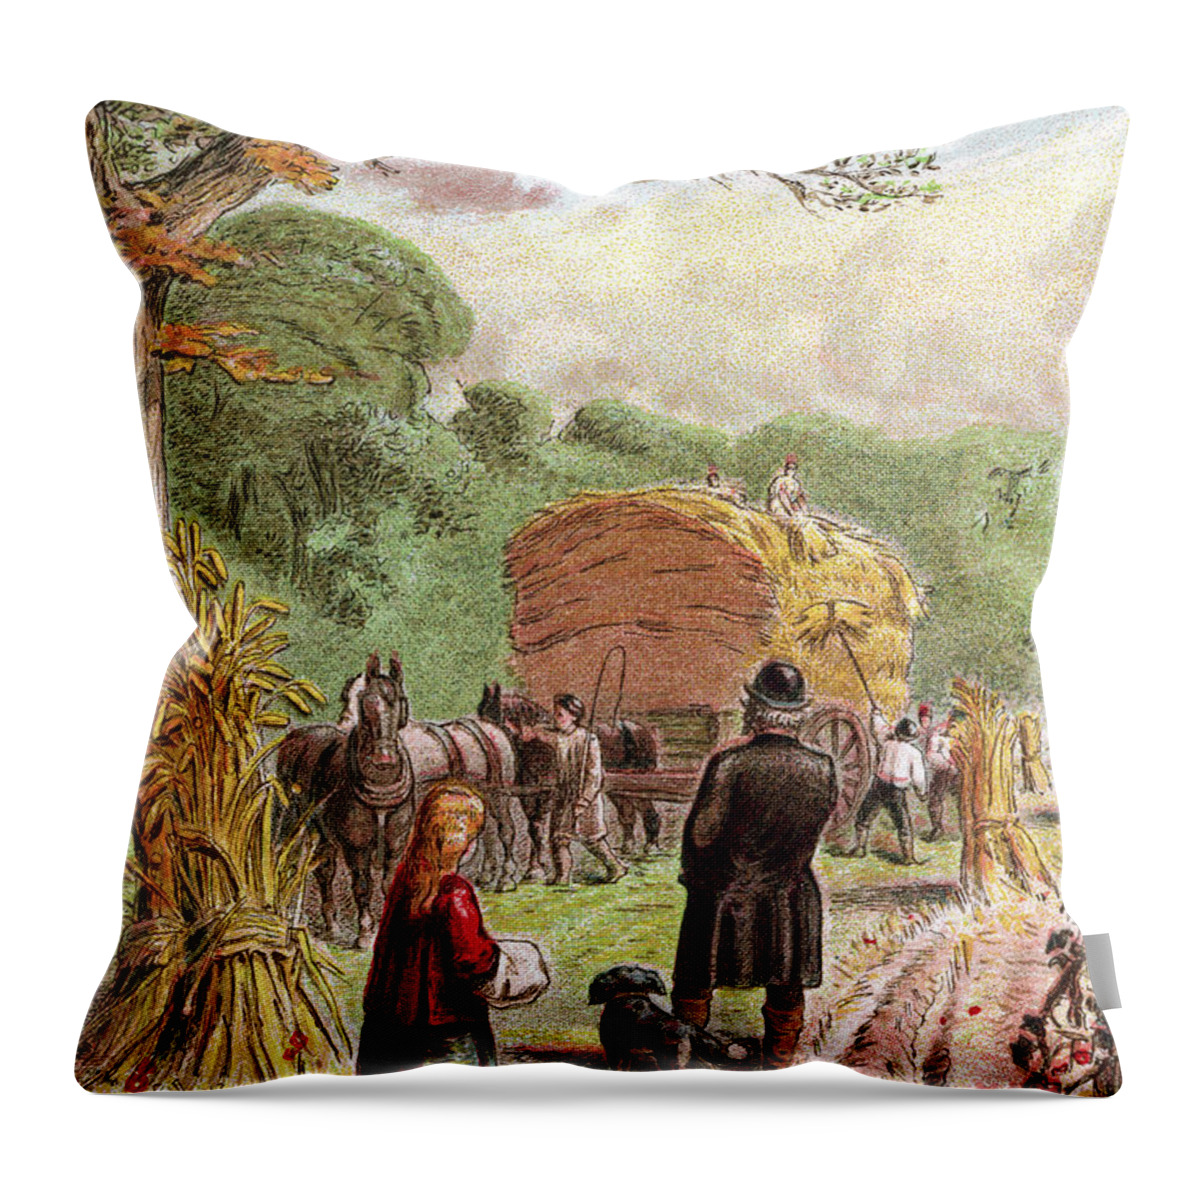 Horse Throw Pillow featuring the digital art August - Bringing In The Harvest by Whitemay